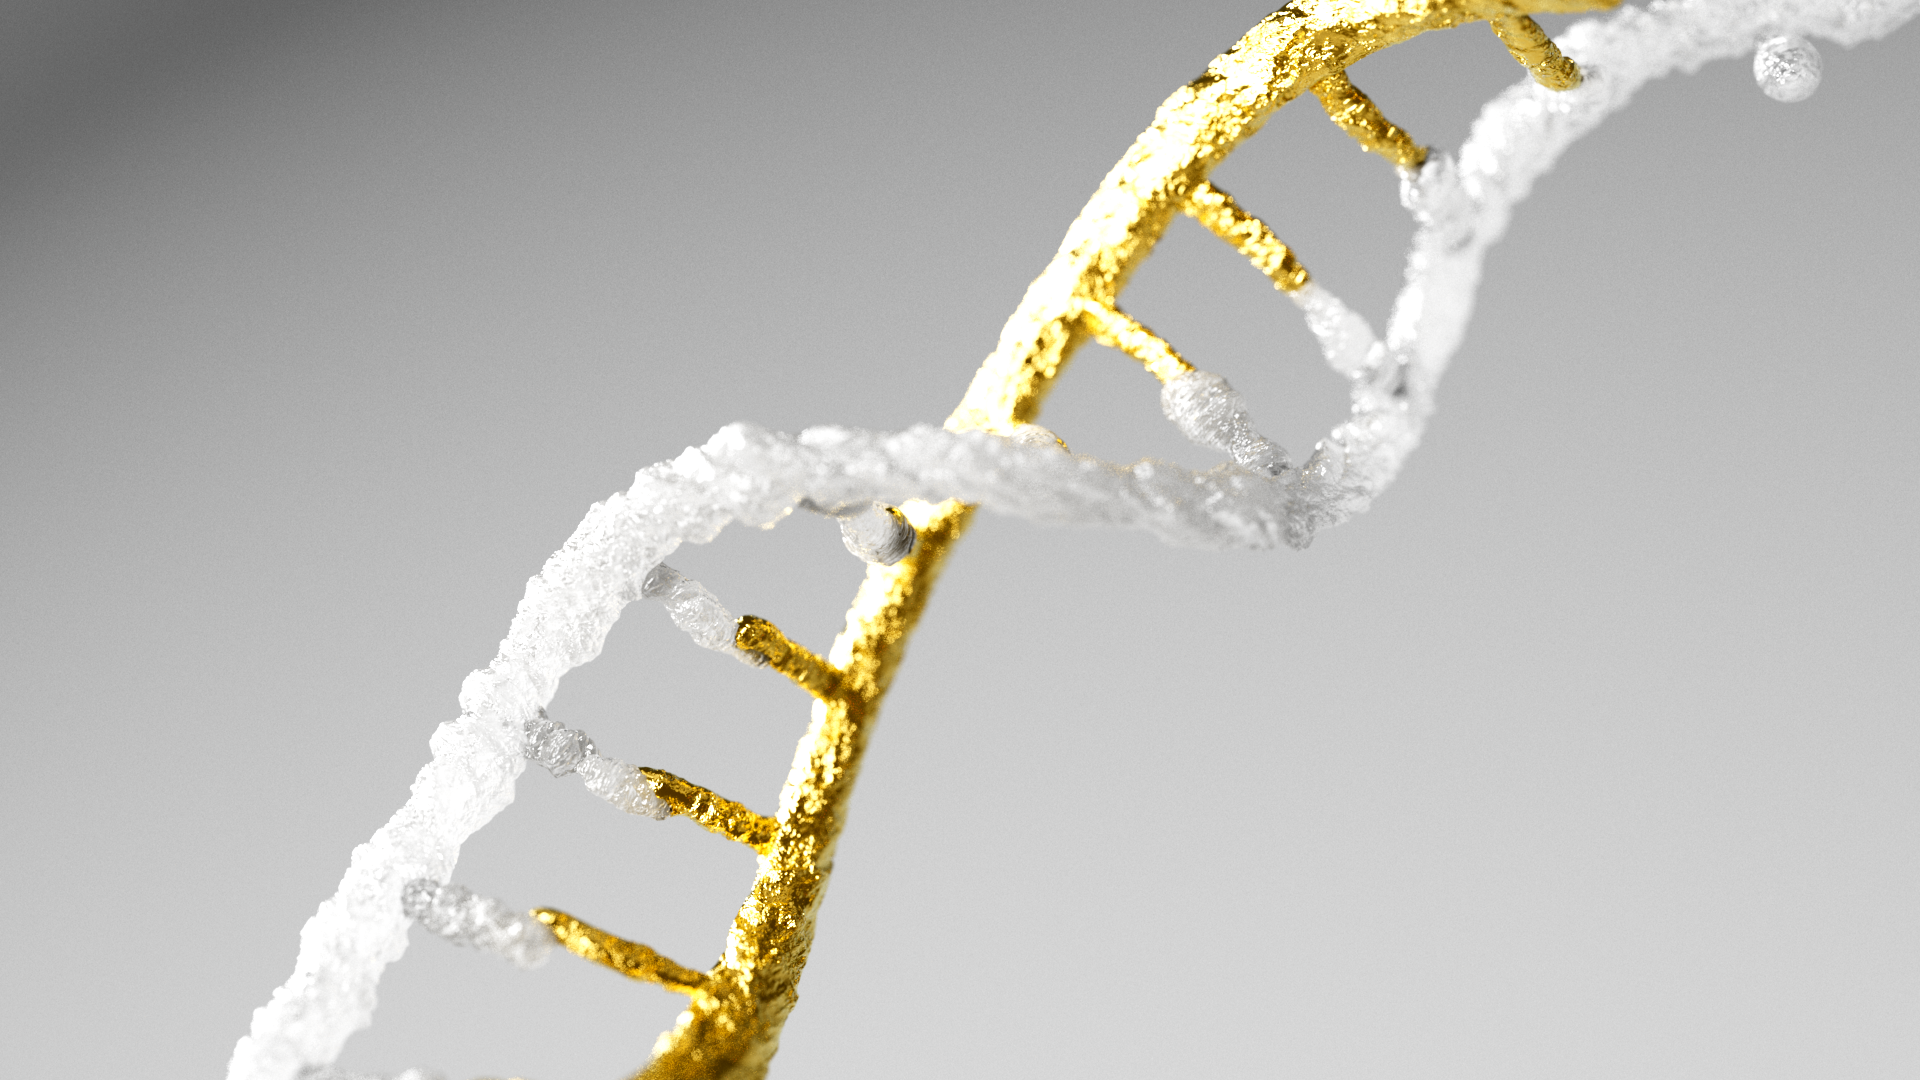 RNA structure 3D animation in white and gold